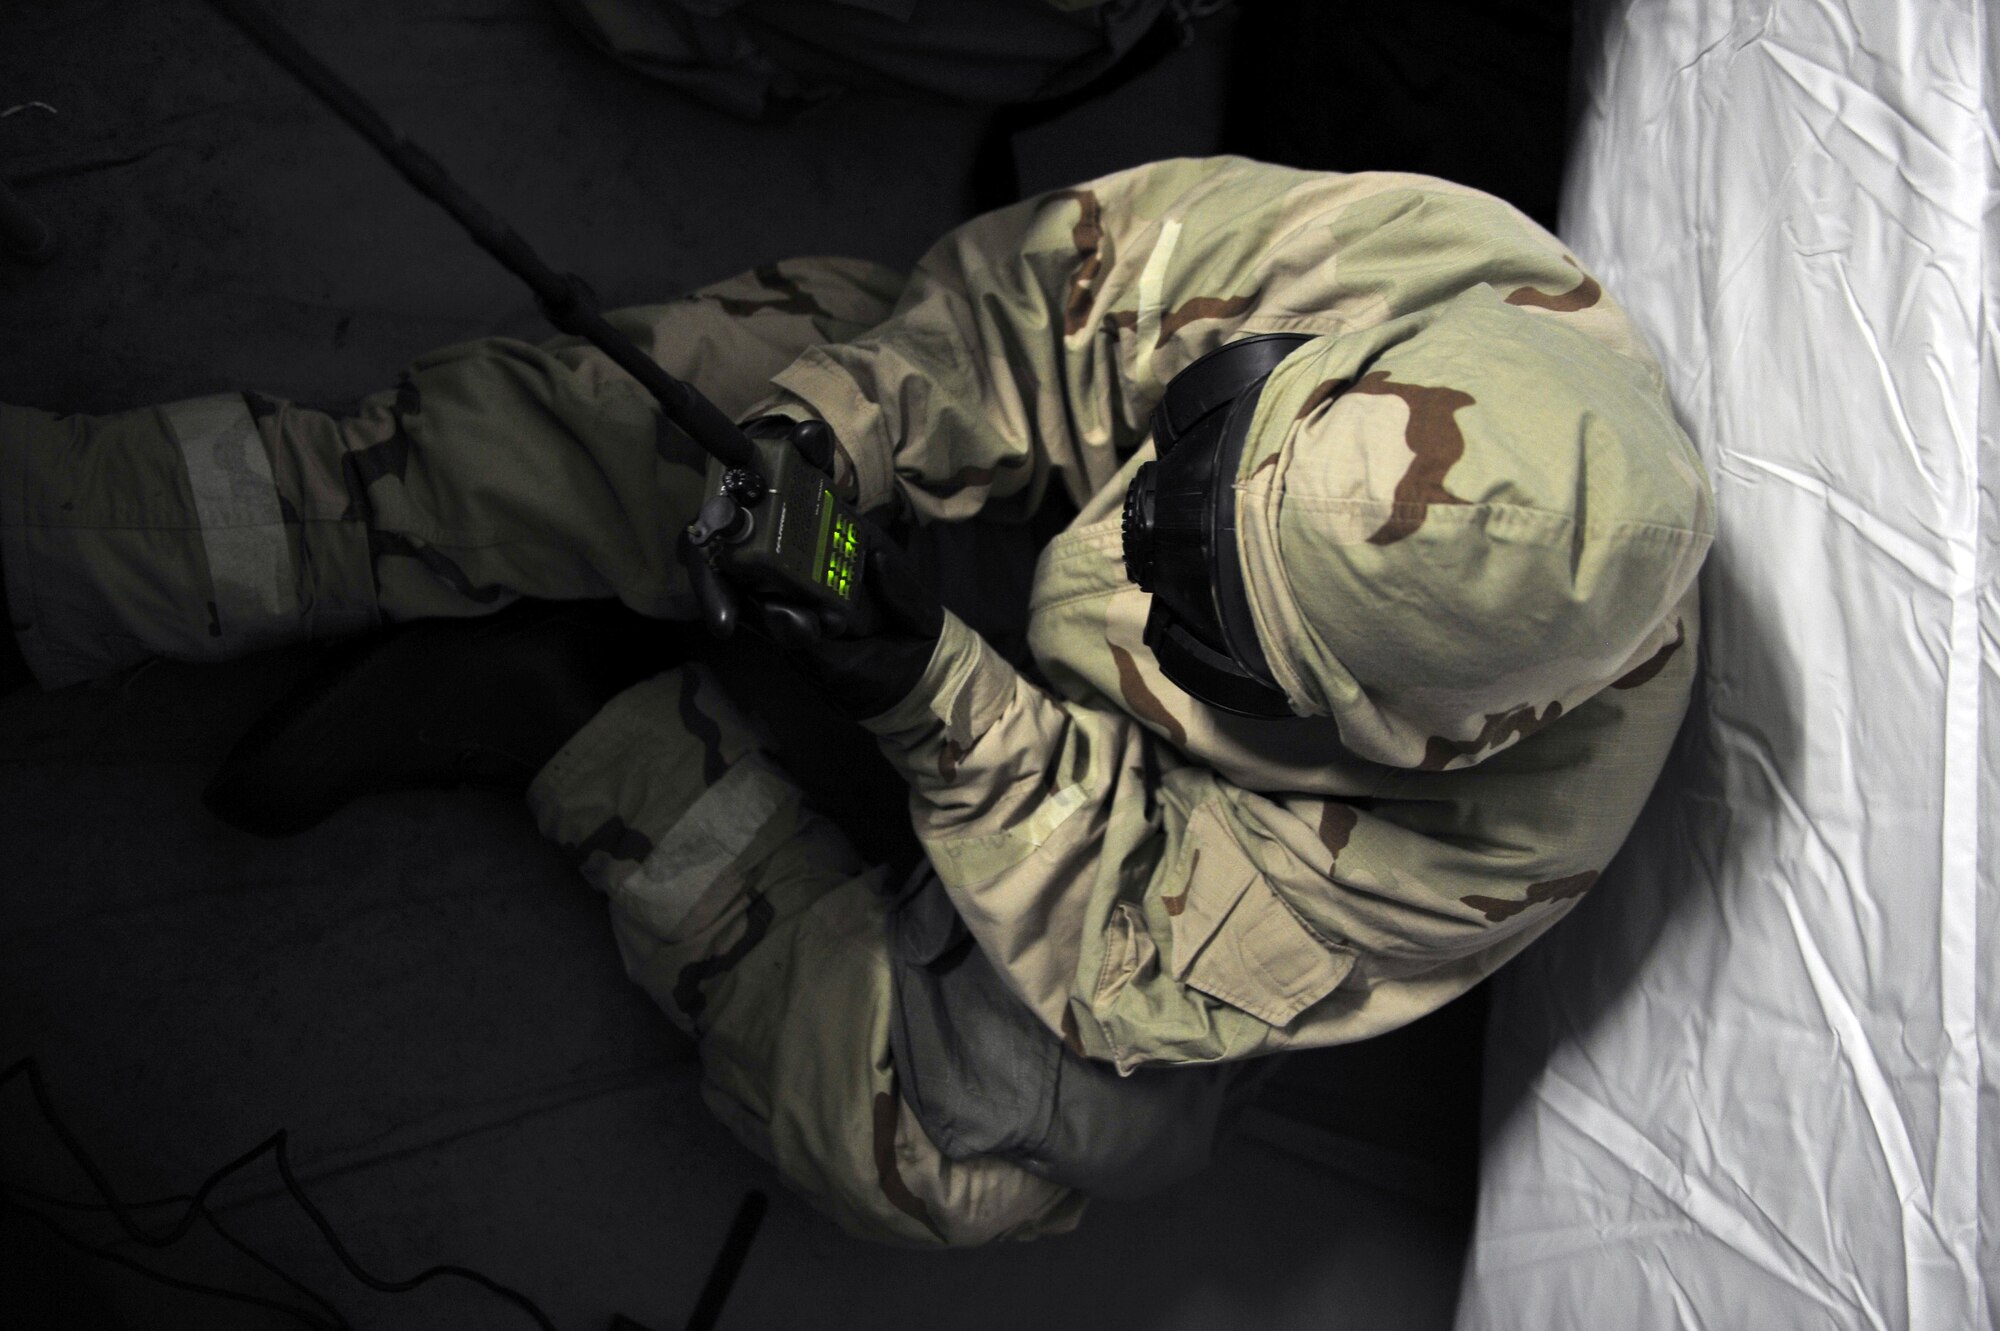 Staff Sgt. Genea Wright, Customer Support NCO-in-charge with the 1st Special Operations Wing Staff Agency, checks her radio during a simulated chemical attack as part of exercise Frigid Archer 2016 at Eglin Range, Fla., Jan. 9, 2016. Frigid Archer tested 1st SOW Air Commandos’ expertise through a myriad of operational and support requirements. (U.S. Air Force photo by Staff Sgt. Tyler Placie)